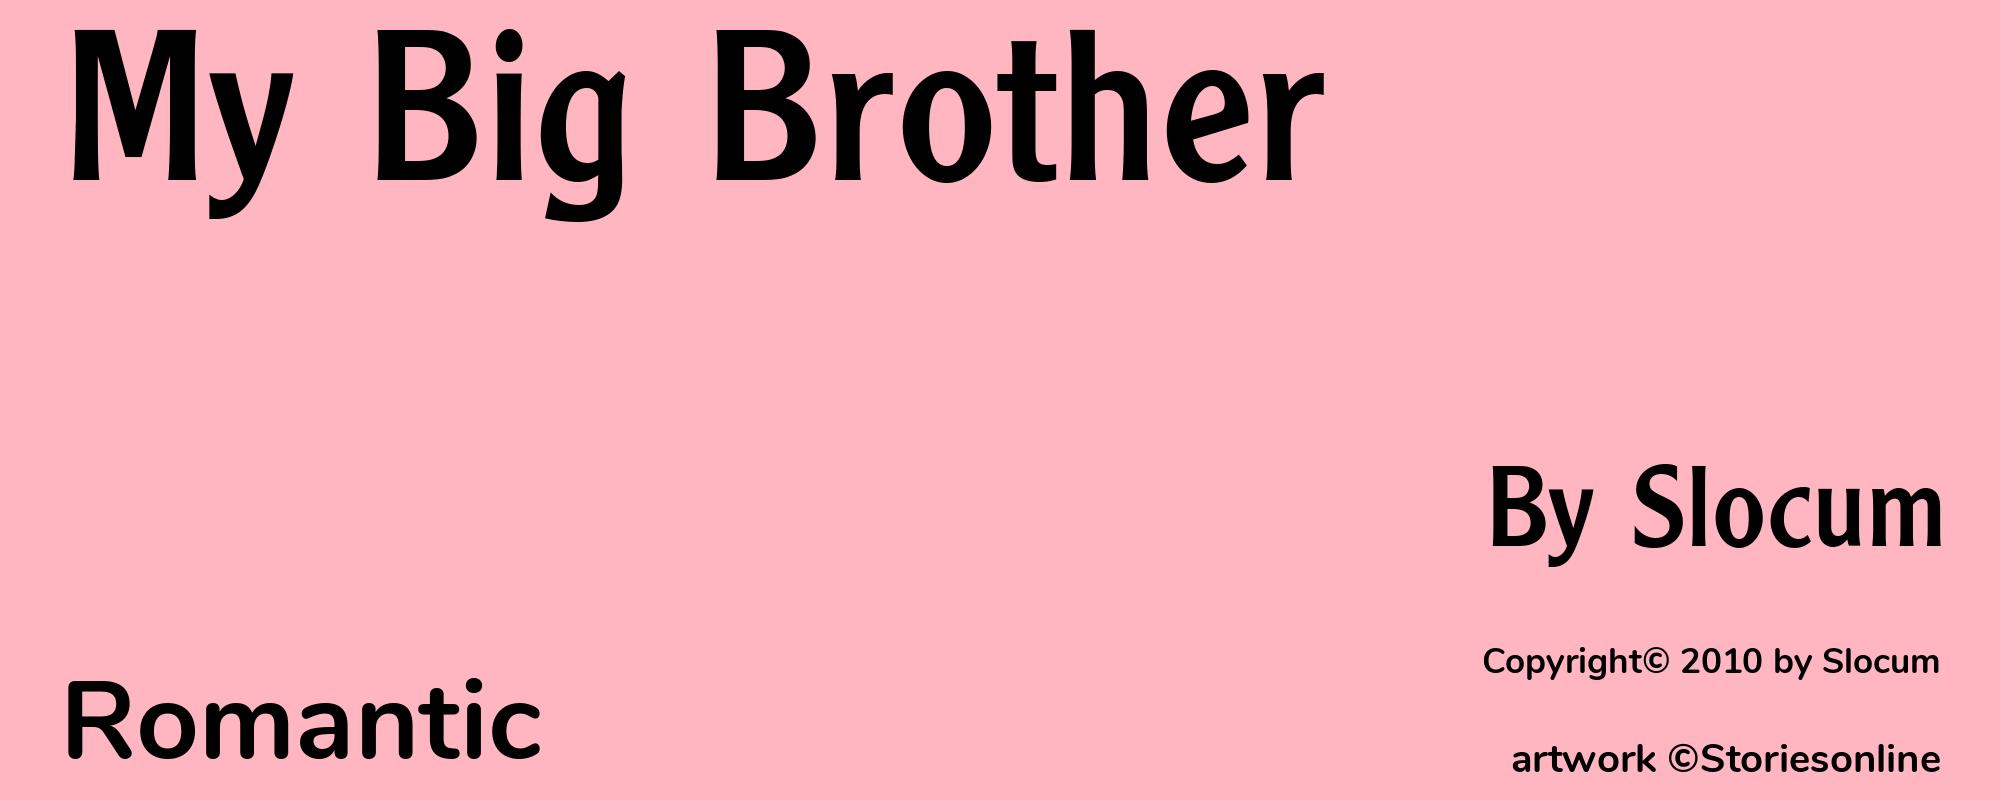 My Big Brother - Cover